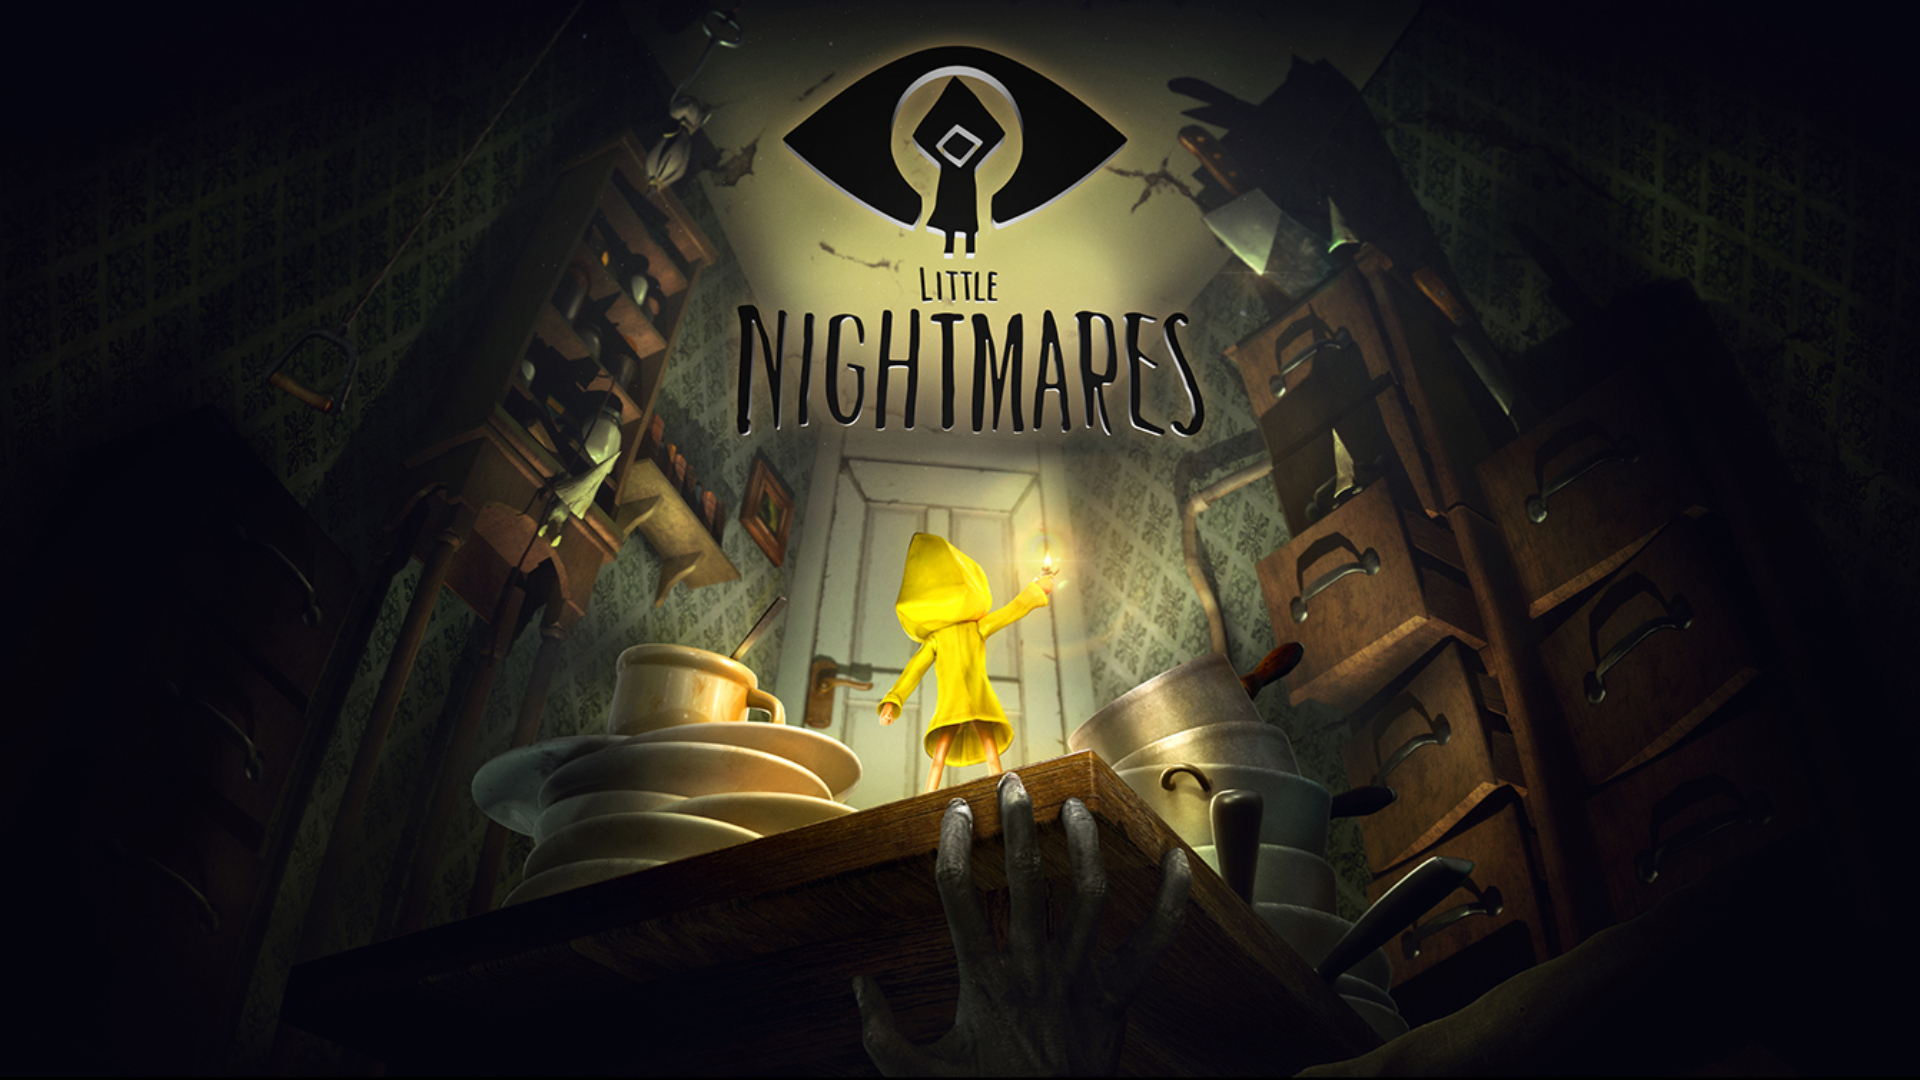 Playdigious' Little Nightmares Is Now Open for Pre-Registrations